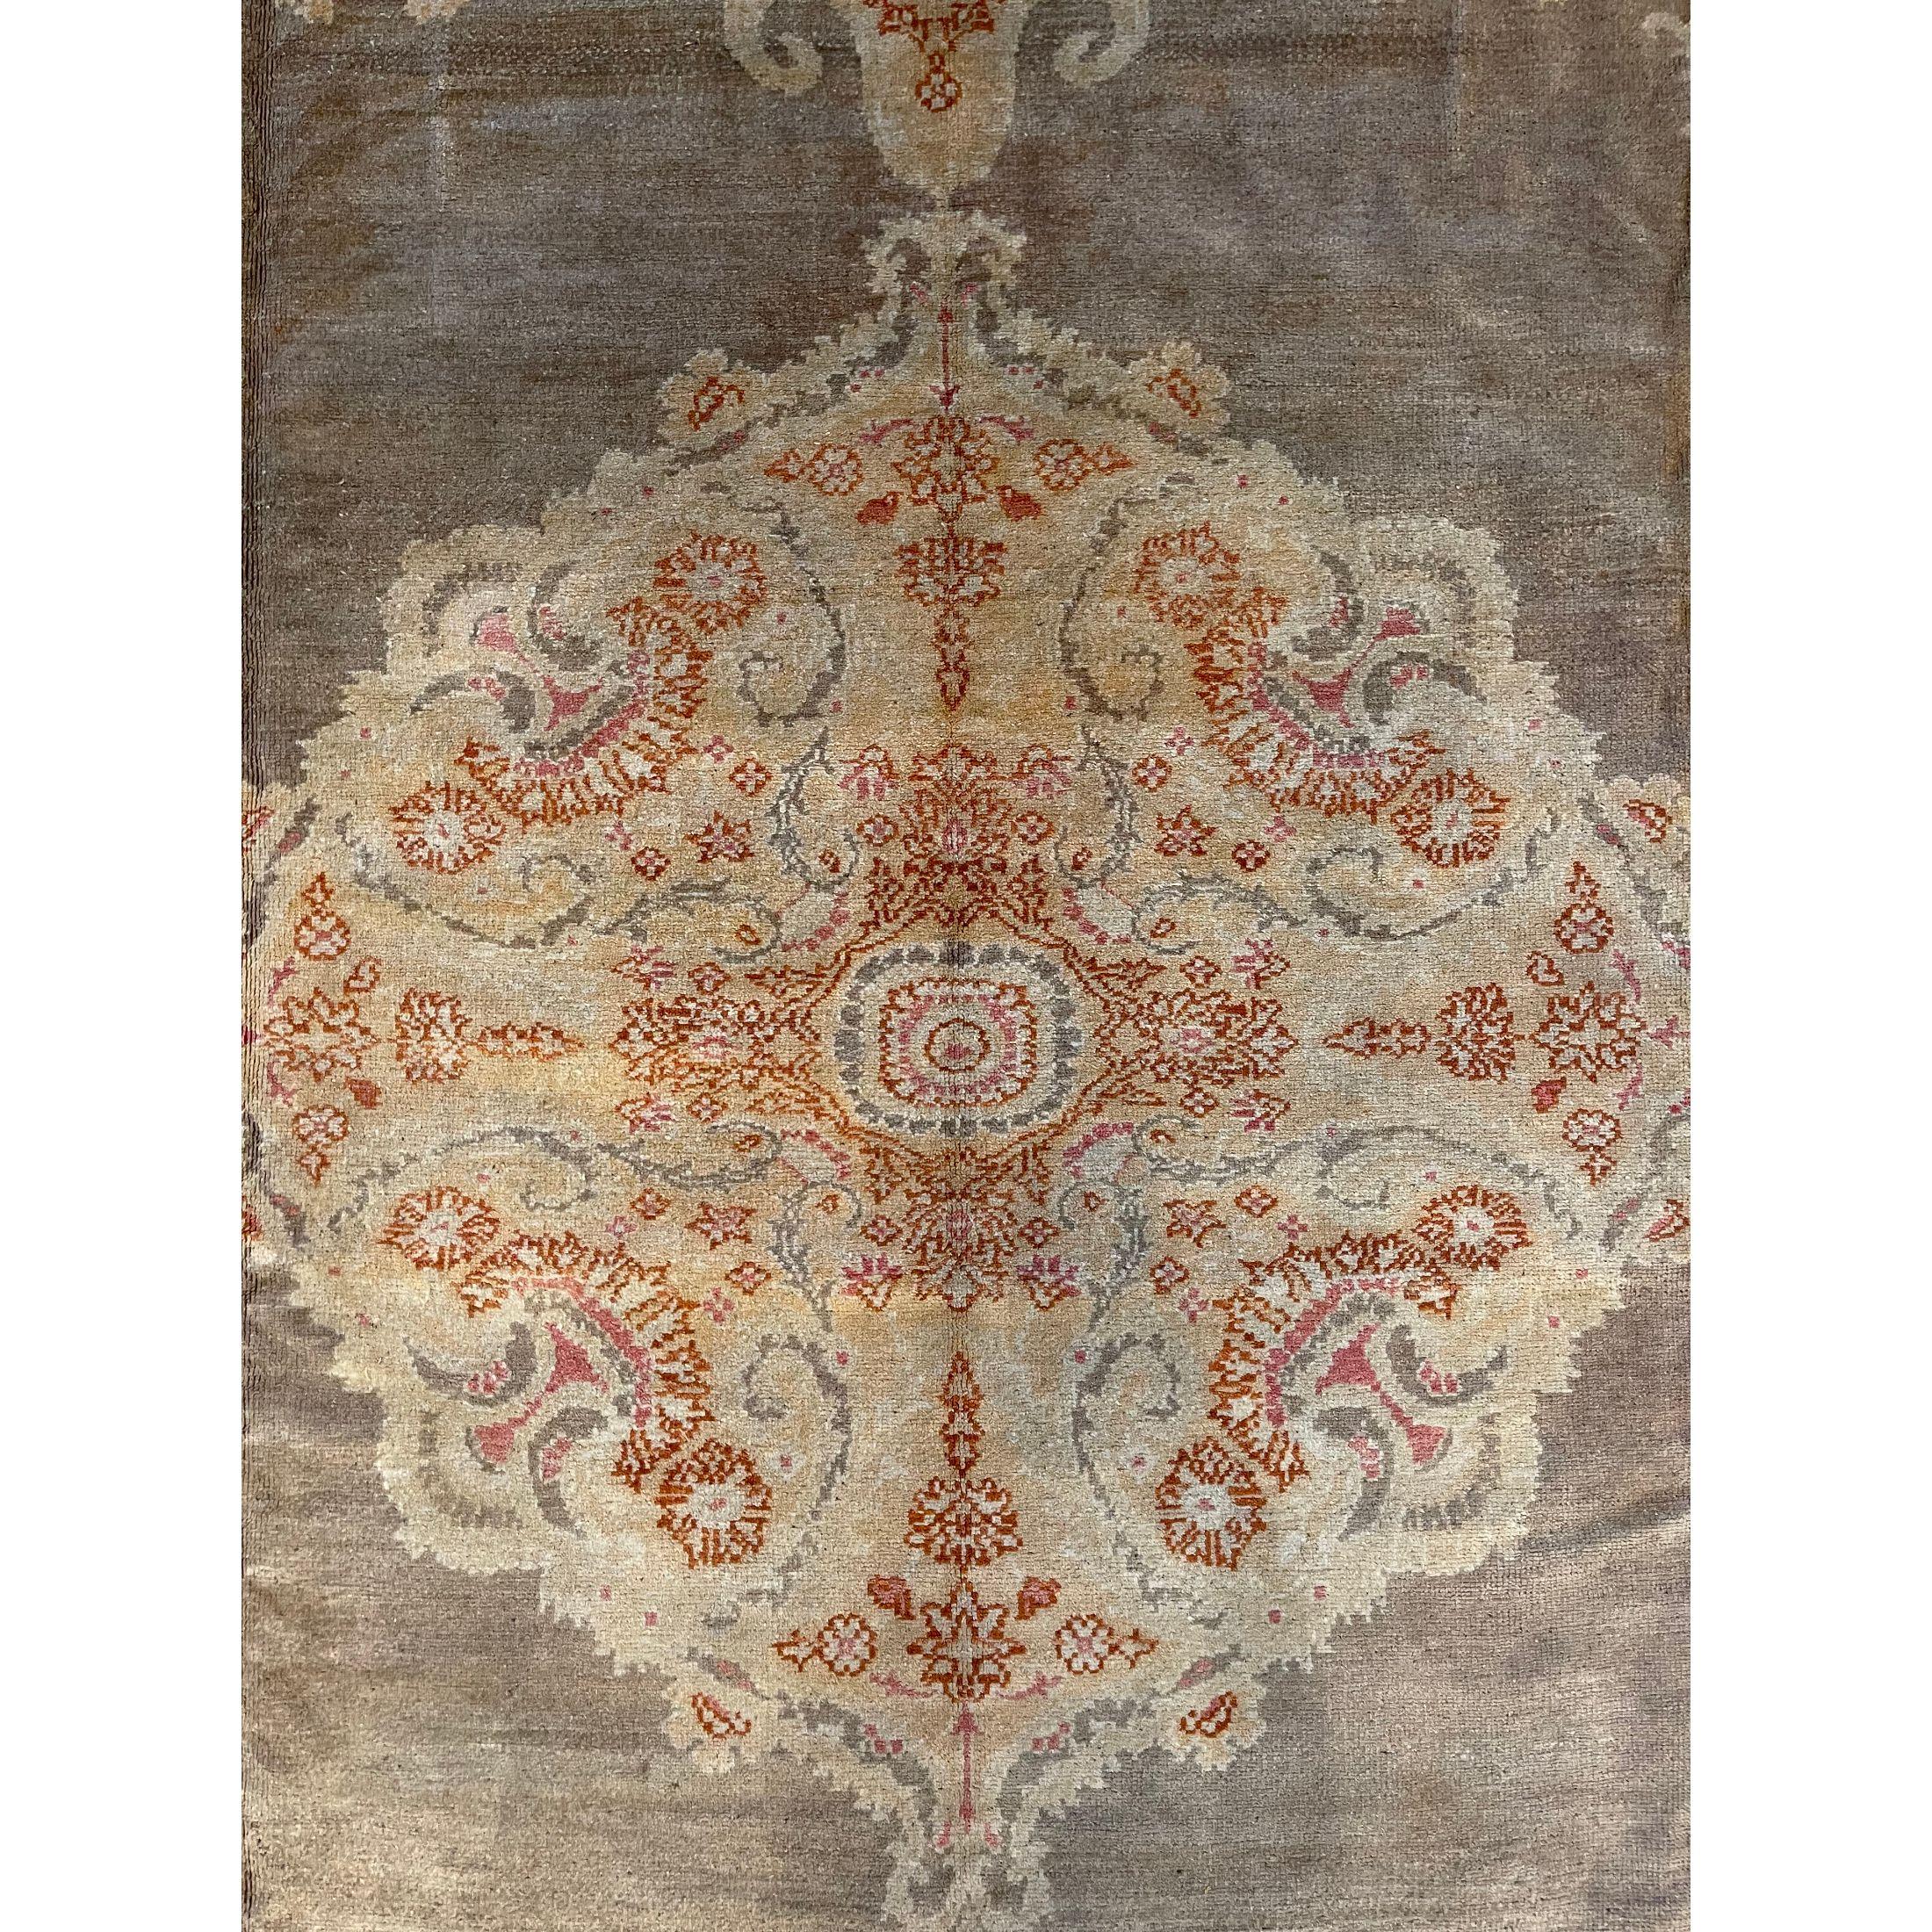 Empire 1920s Antique Indian Rug - 14'10'' X 11'7'' For Sale